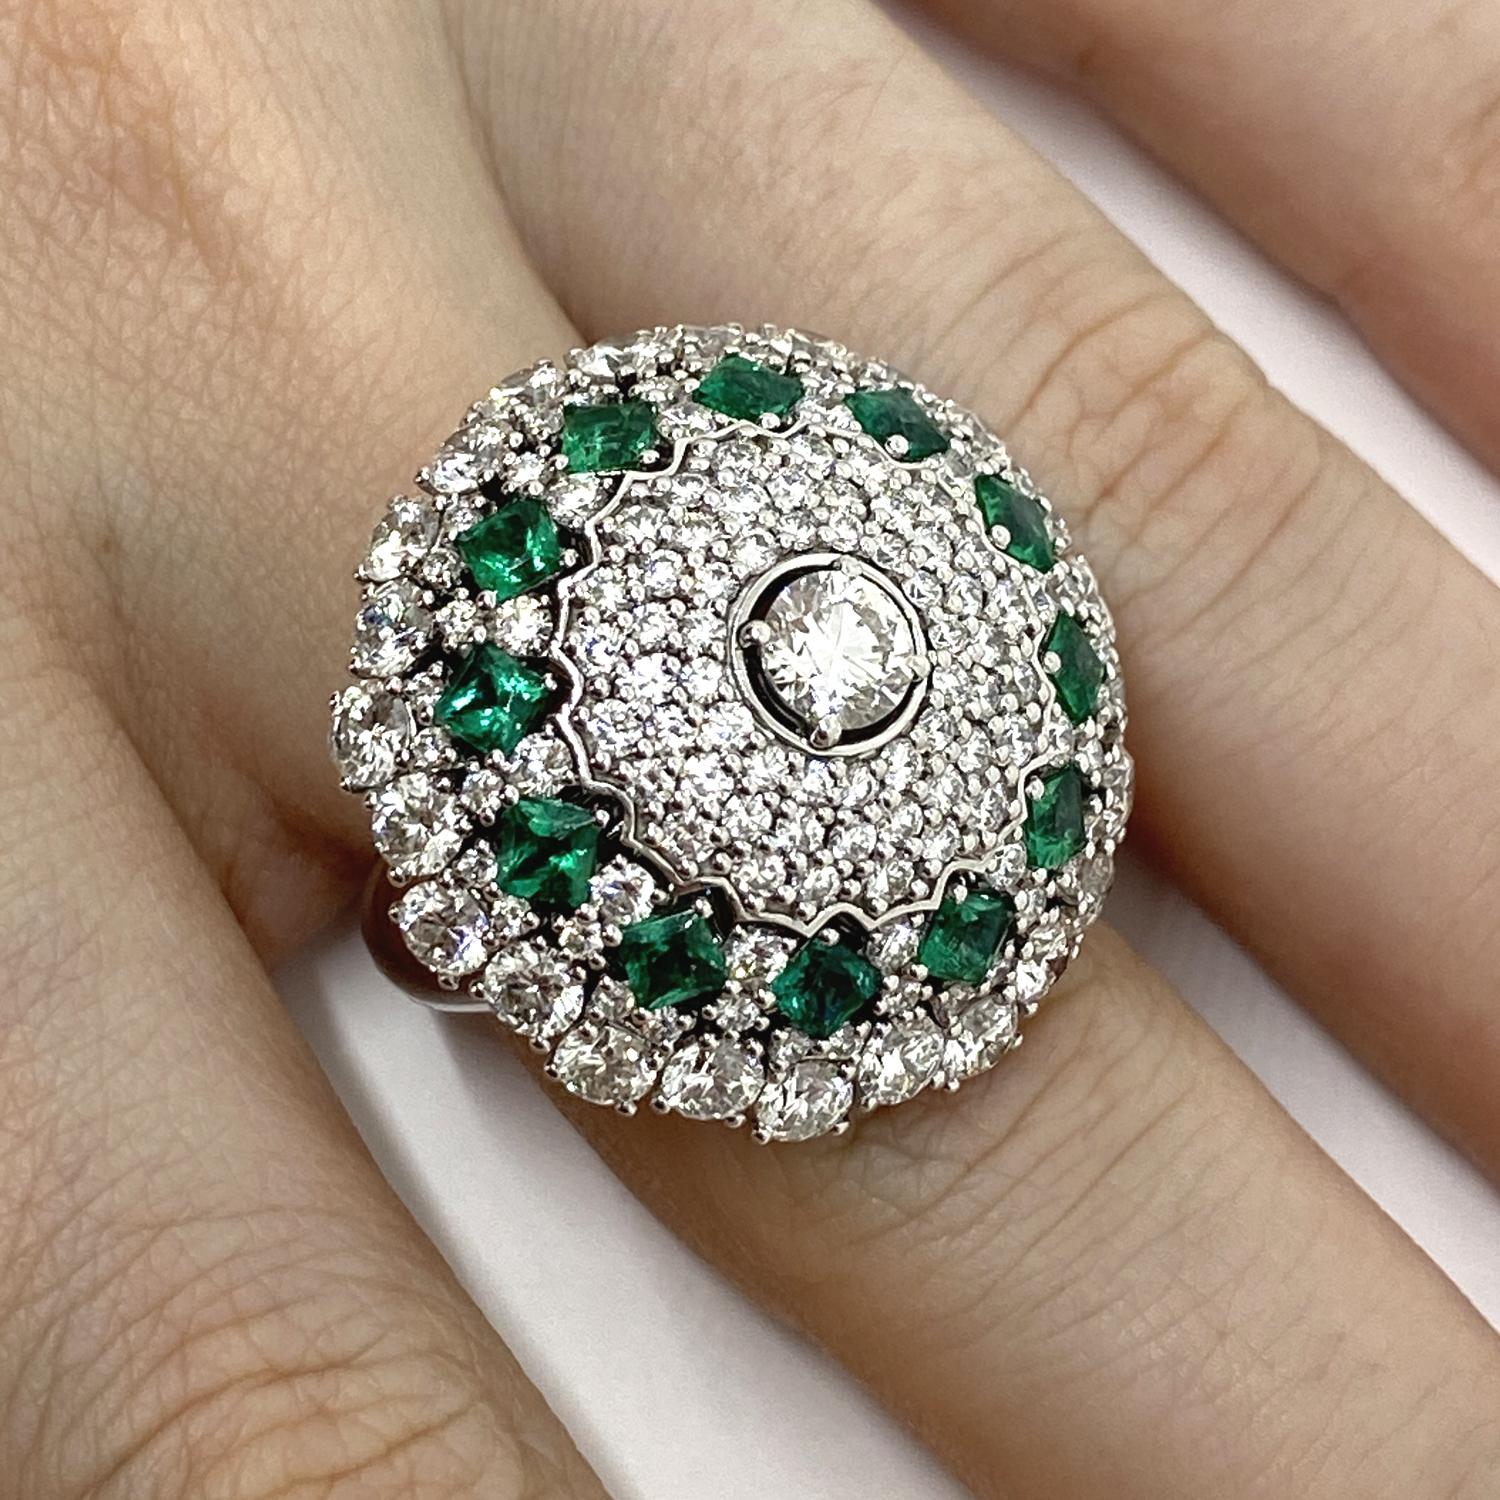 Ring made of 18kt white gold with natural square-cut emeralds for ct.1.60 and natural brilliant-cut white diamonds for ct.5.35 color G VVS

Welcome to our jewelry collection, where every piece tells a story of timeless elegance and unparalleled